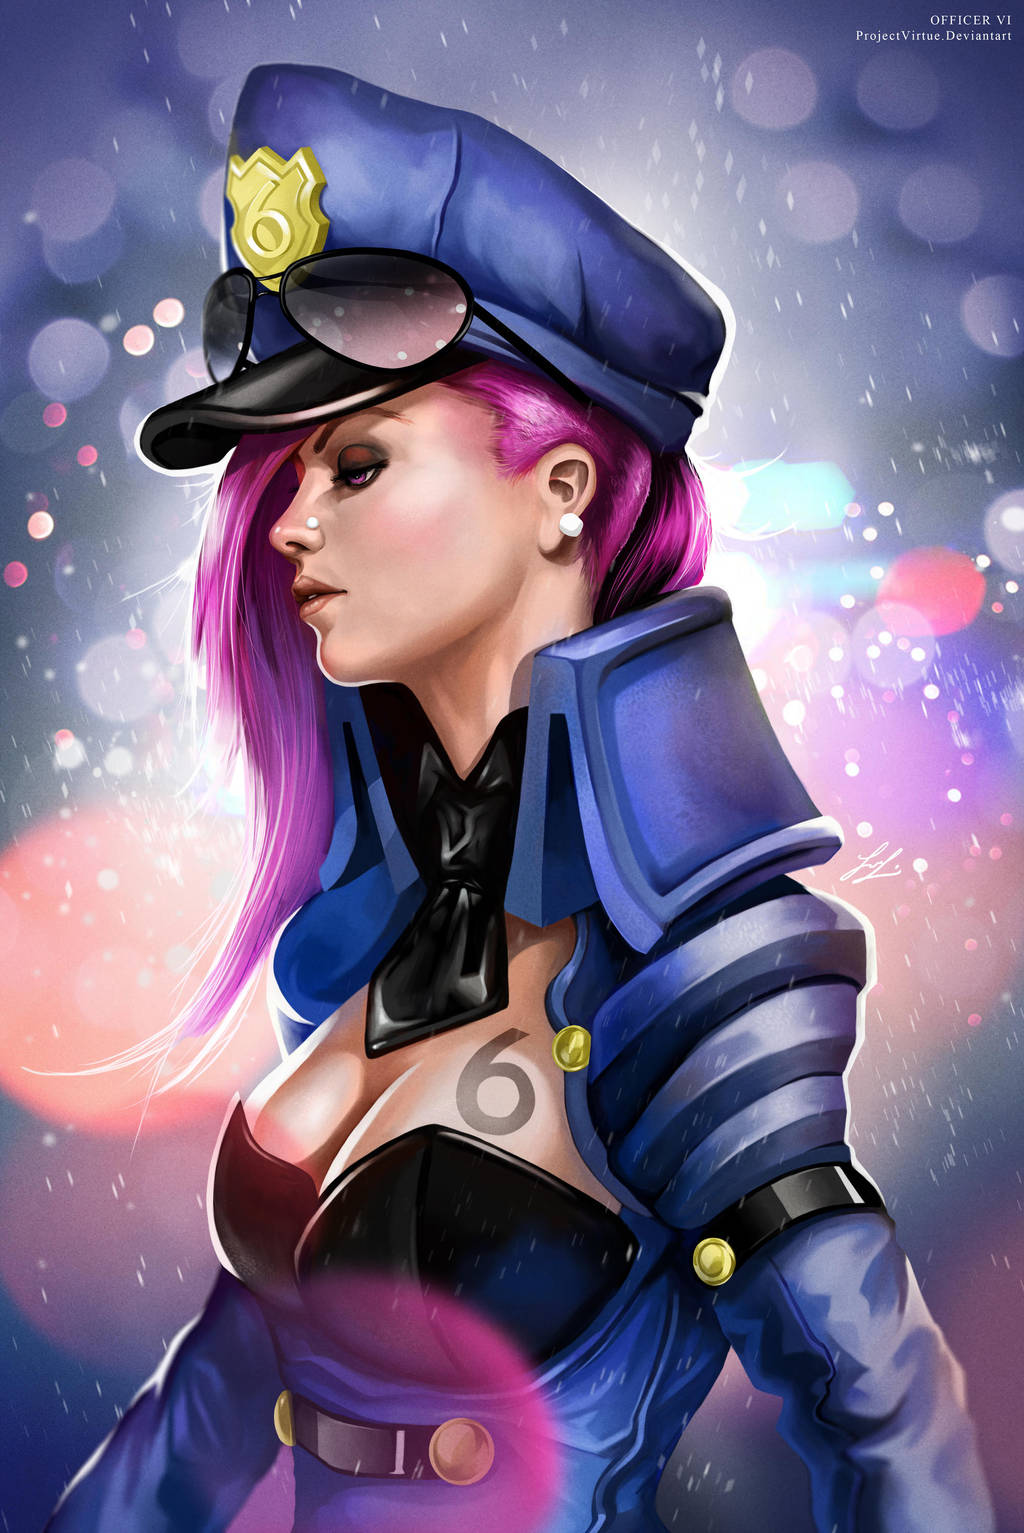 Officer Vi-League of Legends (Skin) by Hoteshi on 